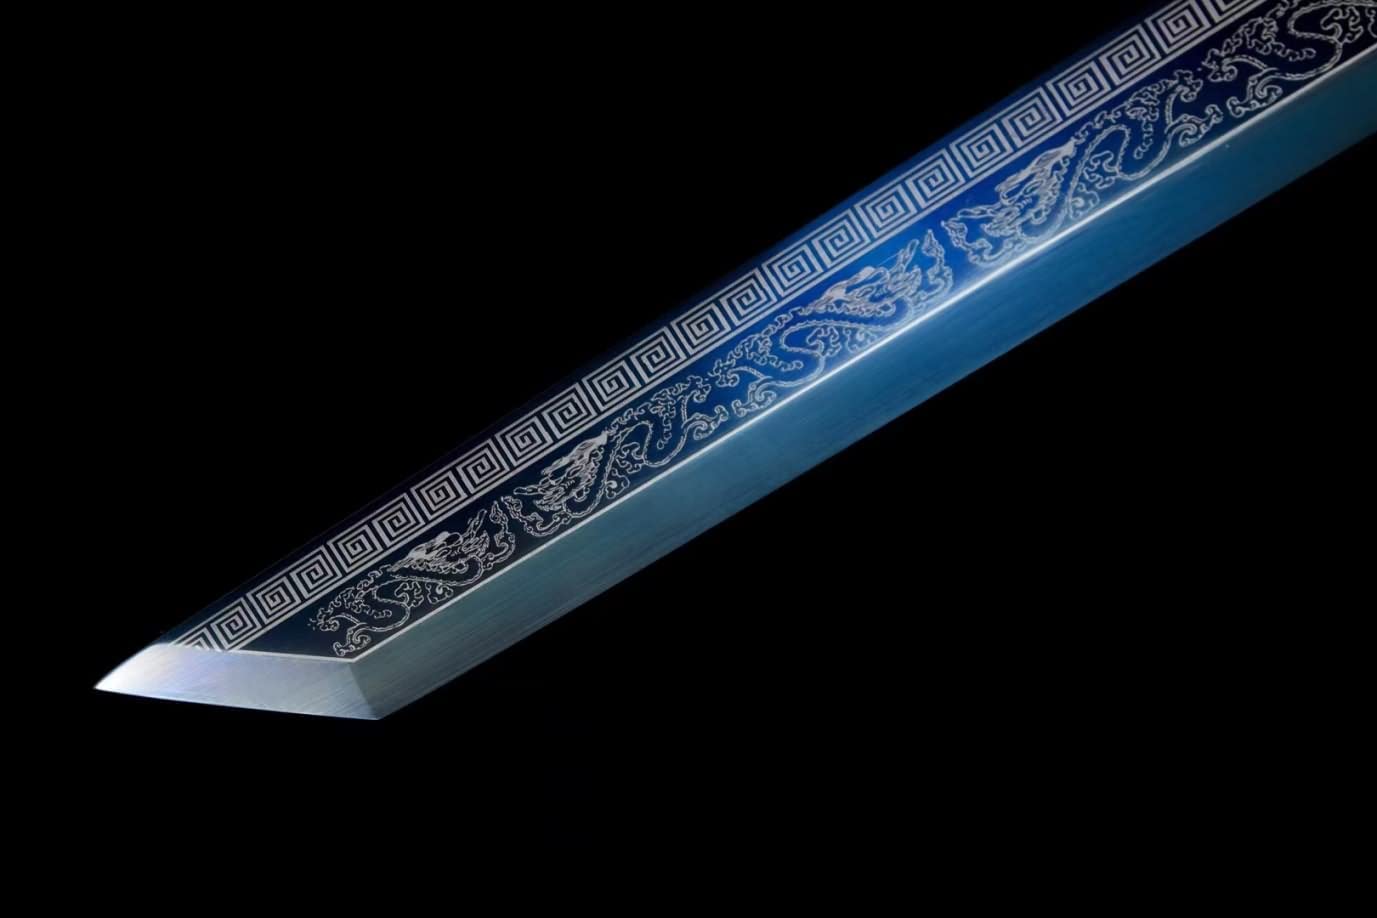 LOONGSWORD,chinese sword,Dragon Tang dao Sword,High Carbon Steel Blade,Alloy Fittings